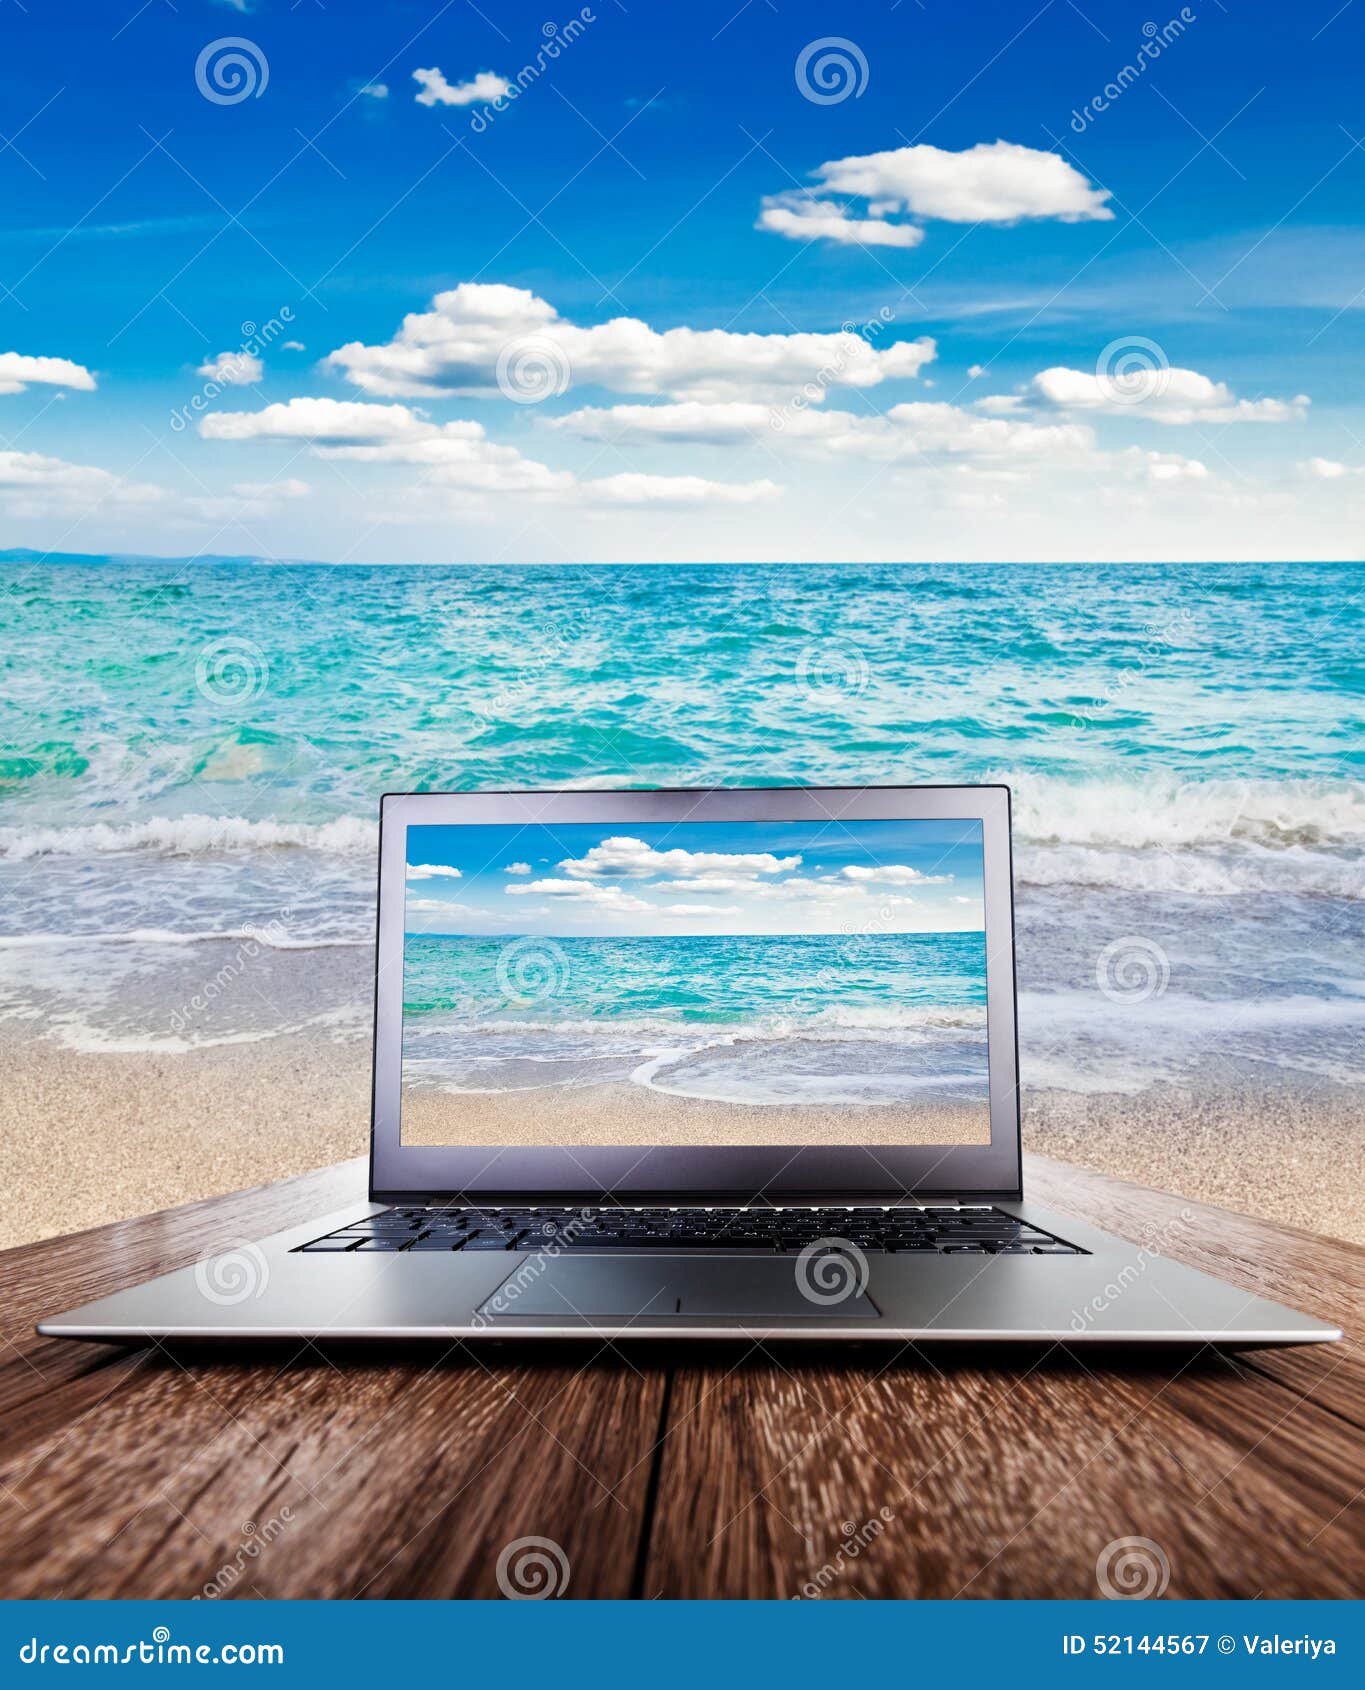 laptop wooden desk view sea over table outdoors sand beach 52144567